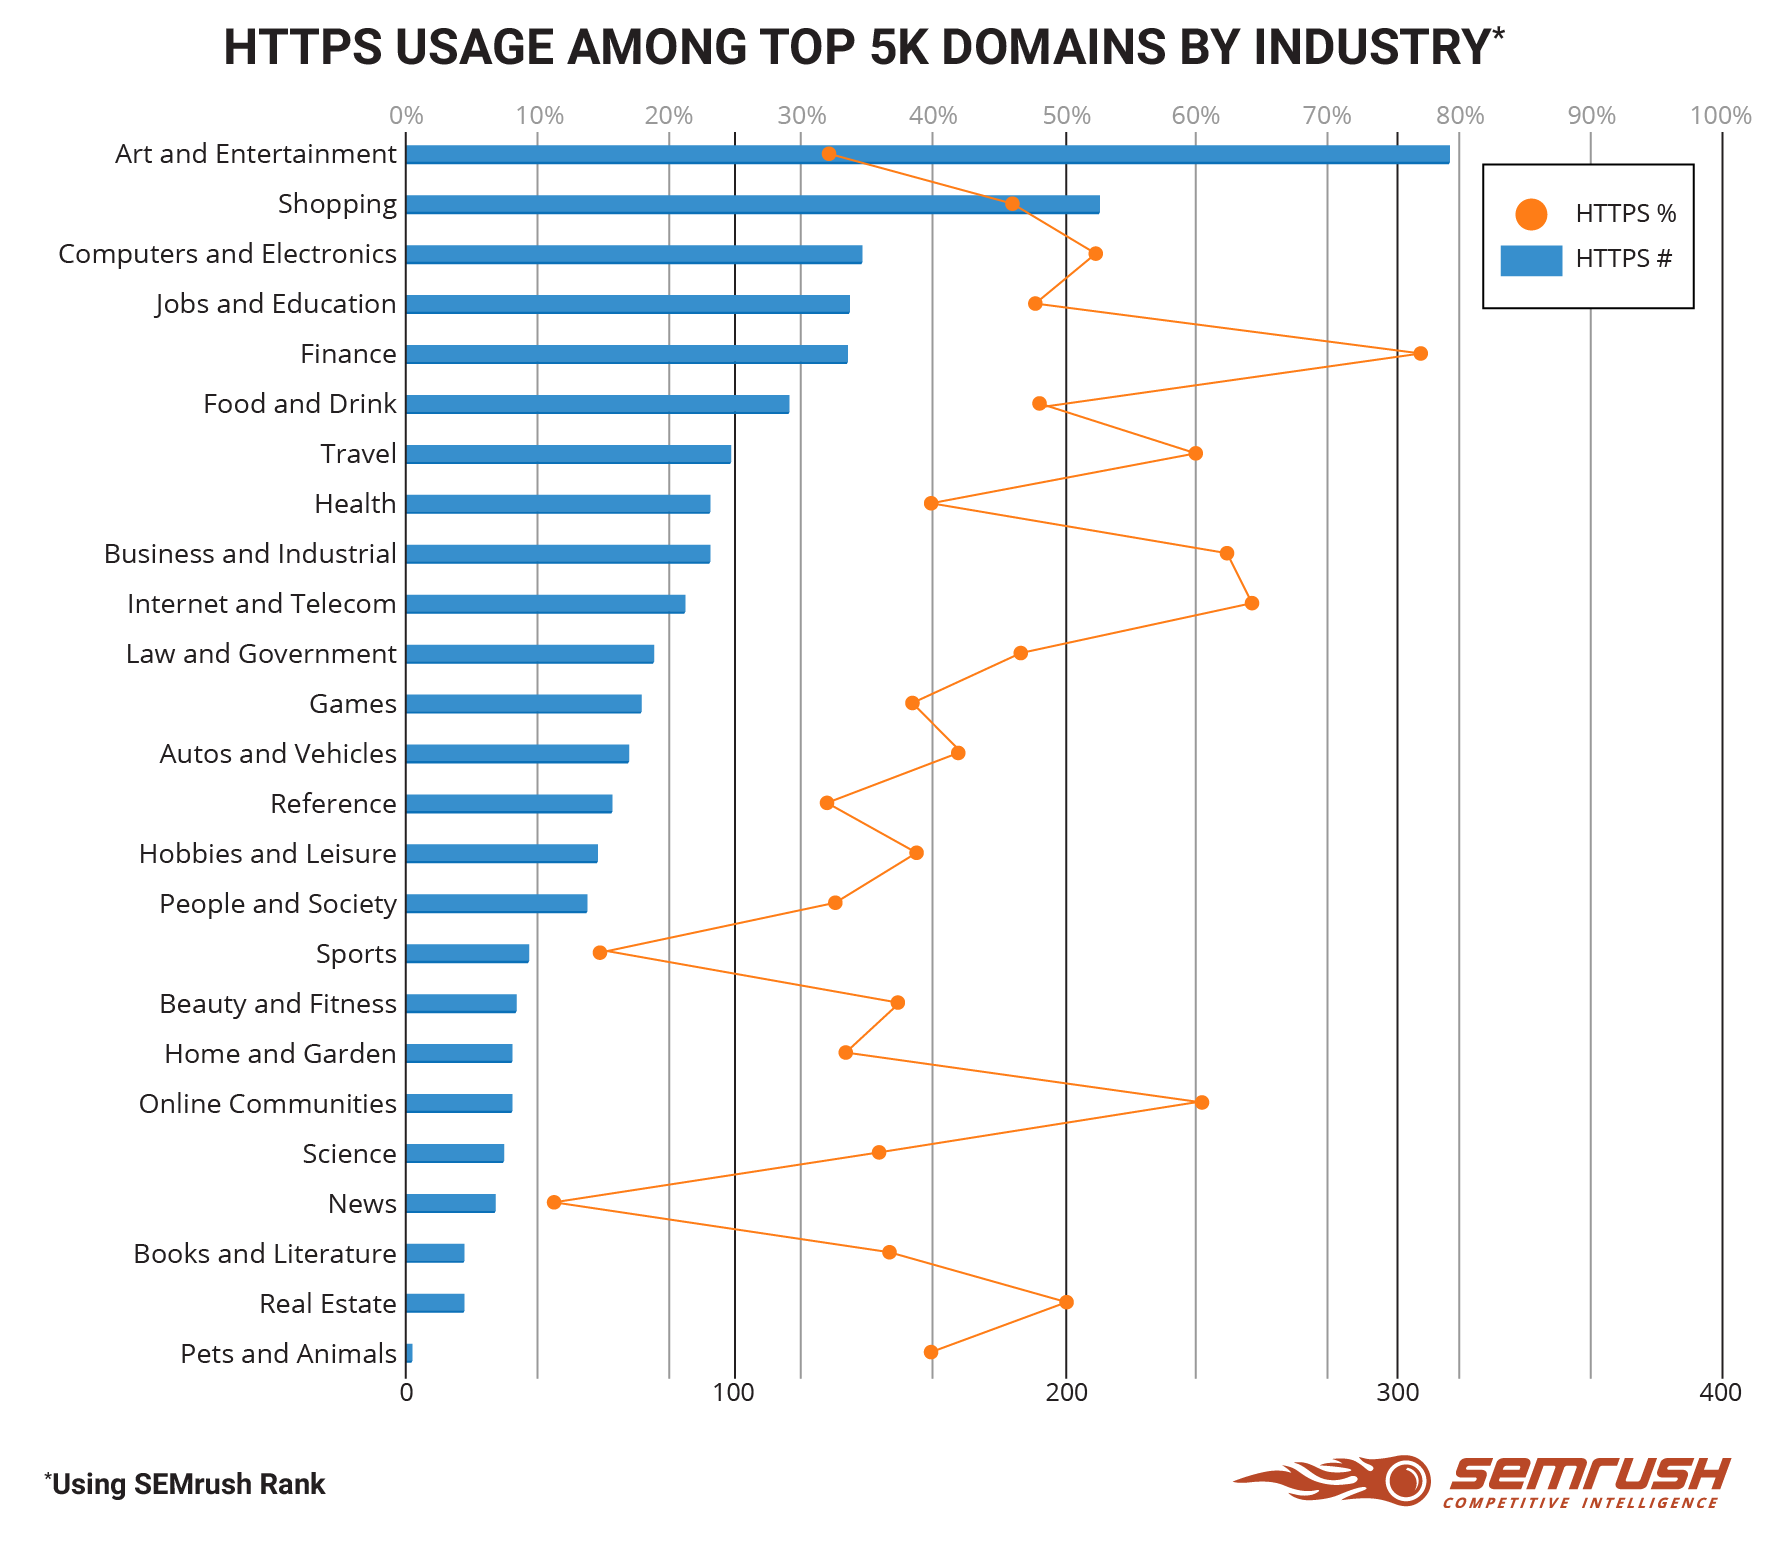 HTTPS usage among top 5k domains by industry